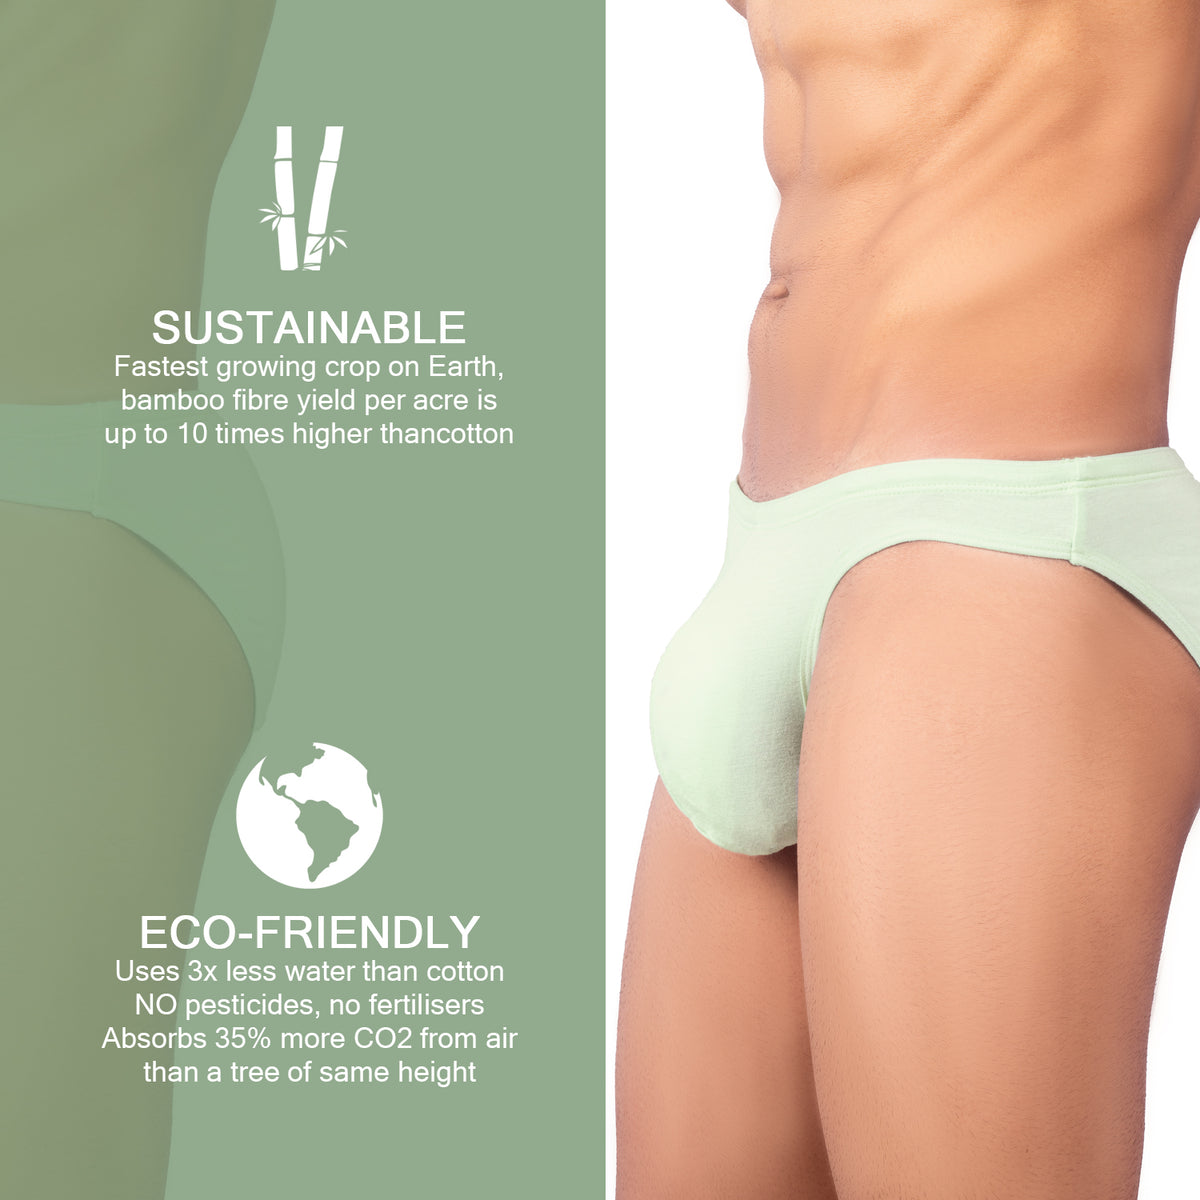 https://www.bruchiclub.com/collections/bamboo-briefs/products/bruchi-club-antibacterial-bamboo-briefs-for-men-one-sea-blue-one-sea-green